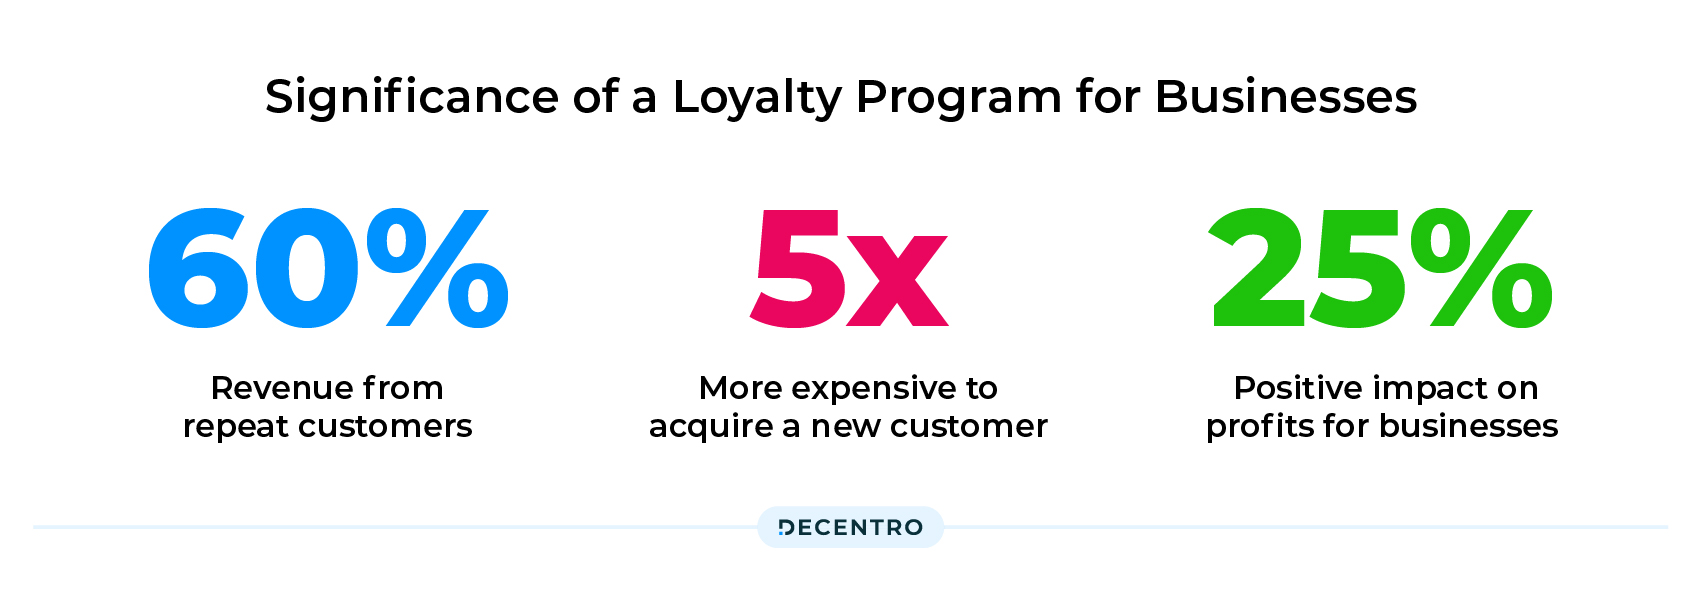 Significance of a Loyalty Program for Businesses 